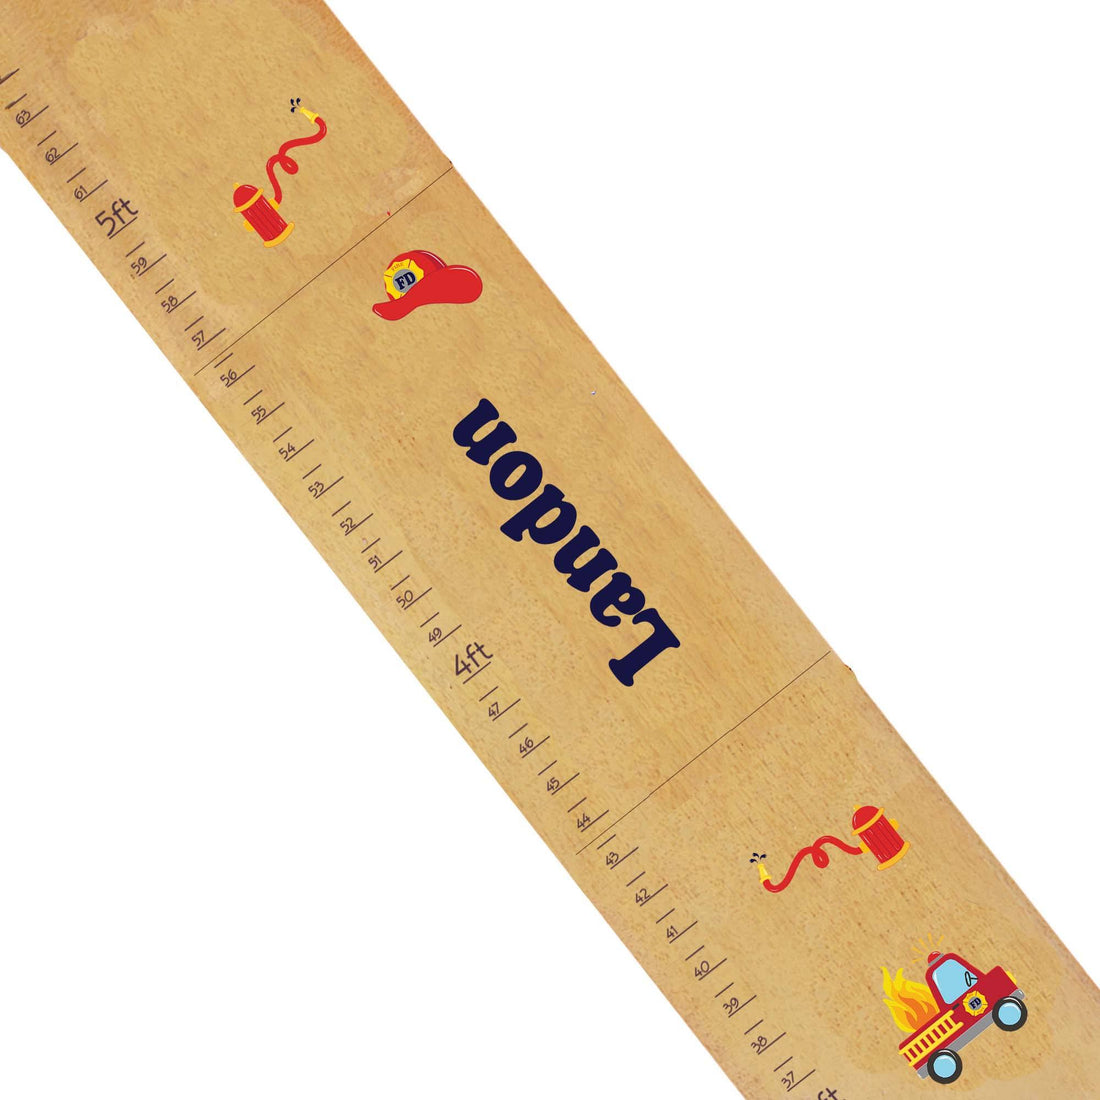 Personalized Natural Growth Chart With Firetruck Design